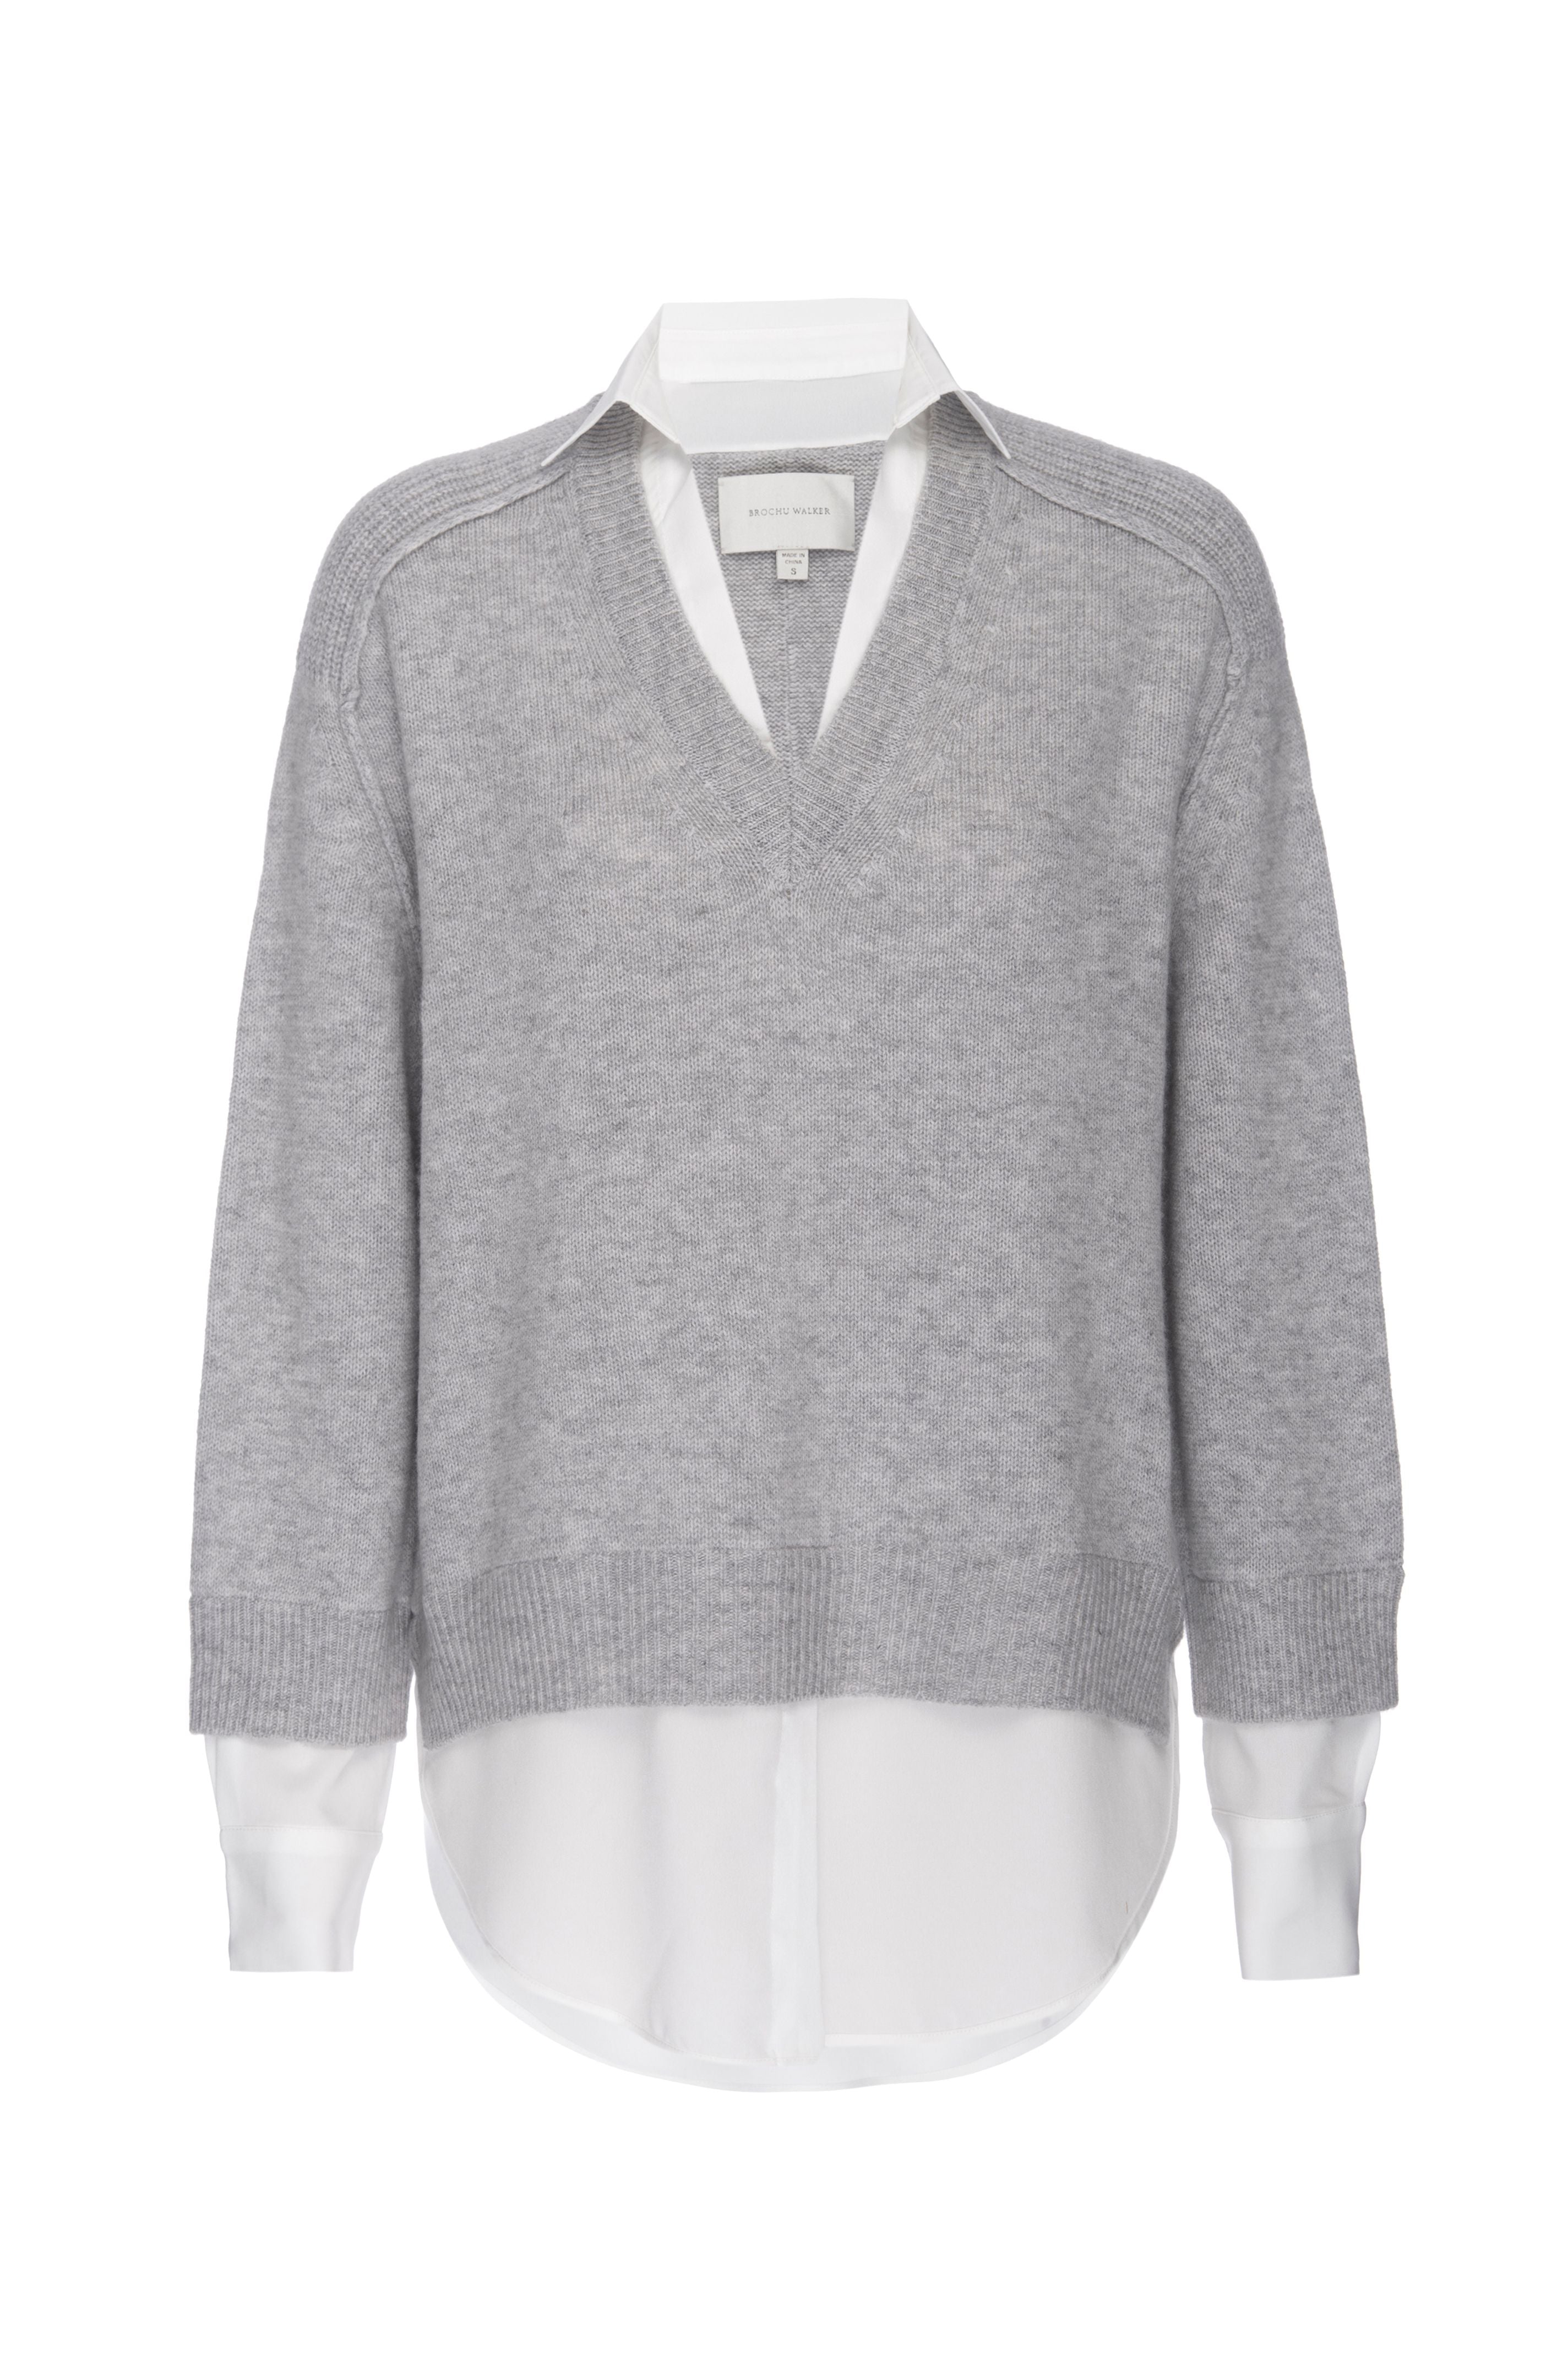 Looker ligth light grey layered v-neck sweater flat view